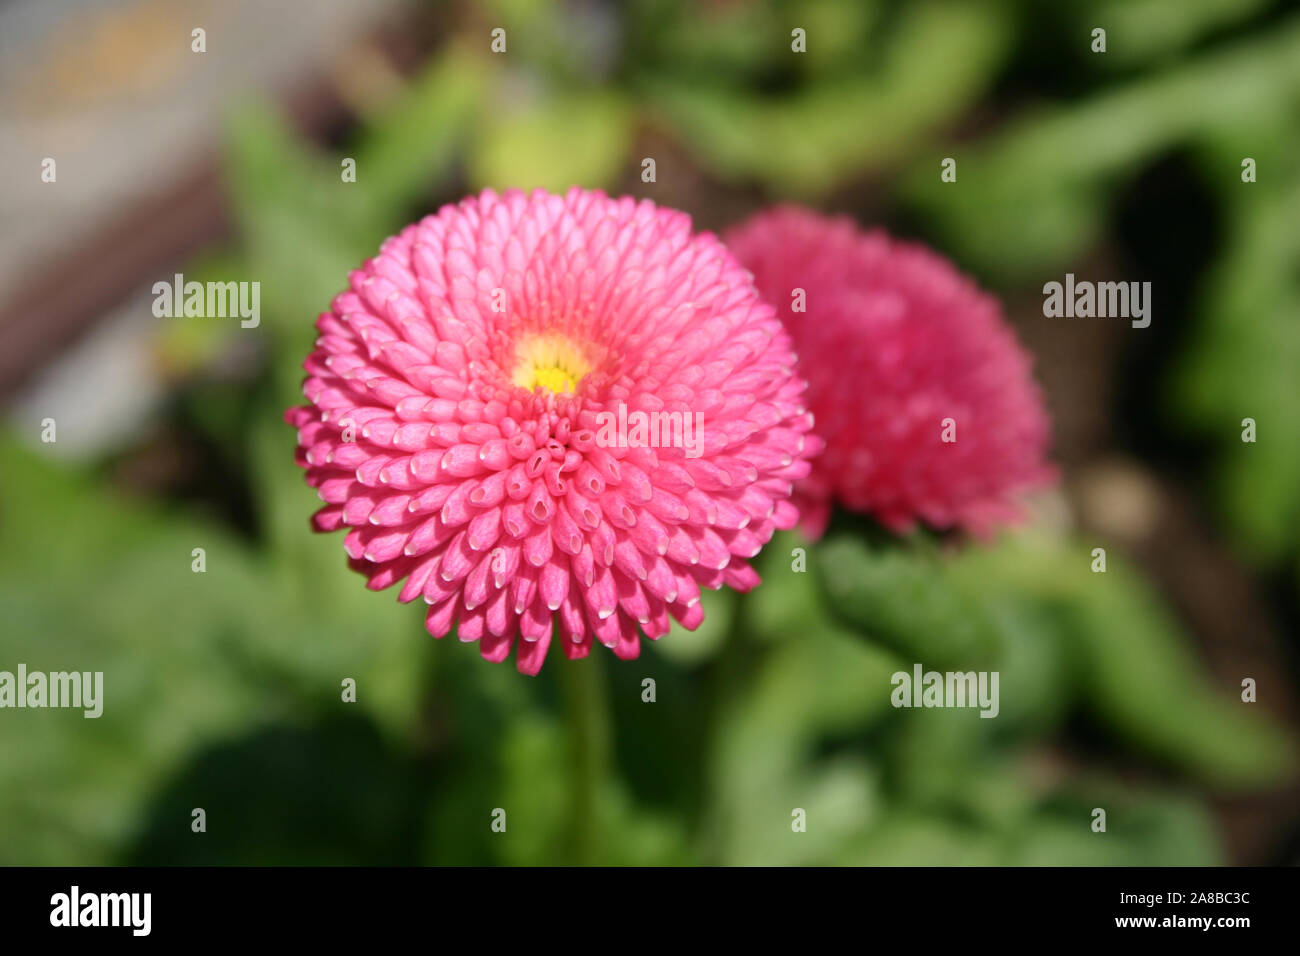 CLOSE-UP OF A COMMON OR ENGLISH DAISY (BELLIS PERENNIS) Stock Photo